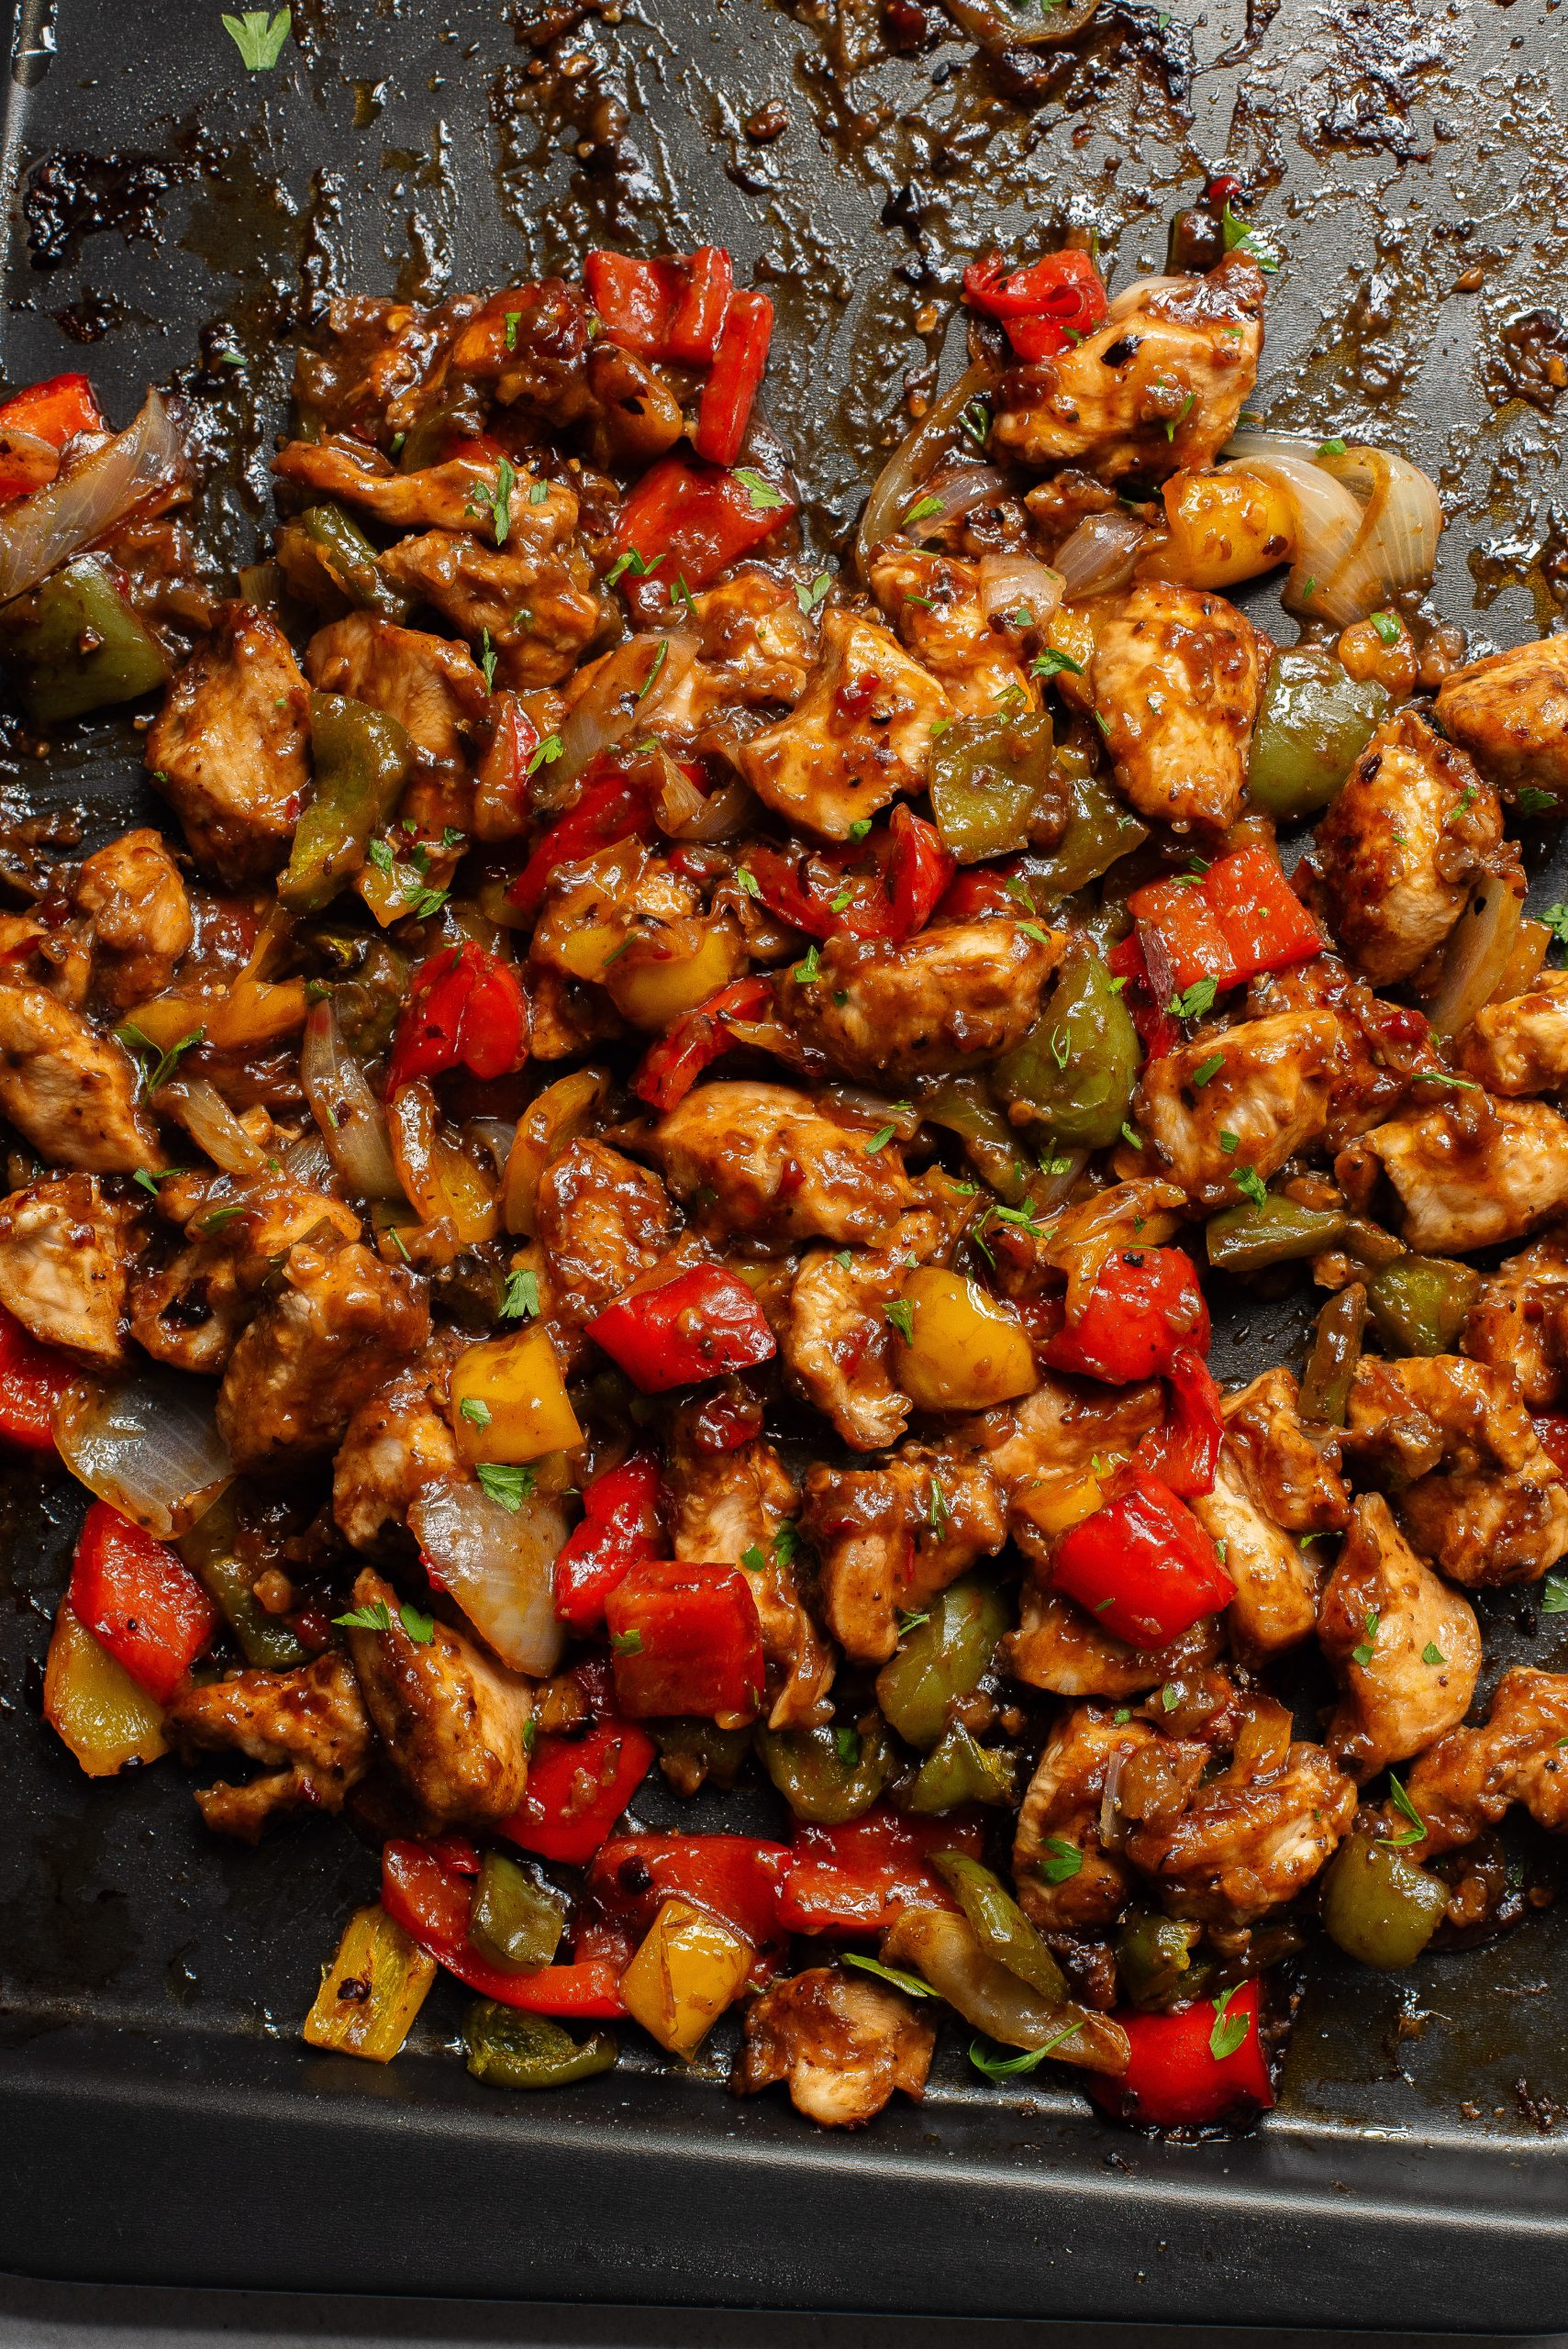 Roasted chicken with bell peppers and onions in a rich sauce on a baking sheet.